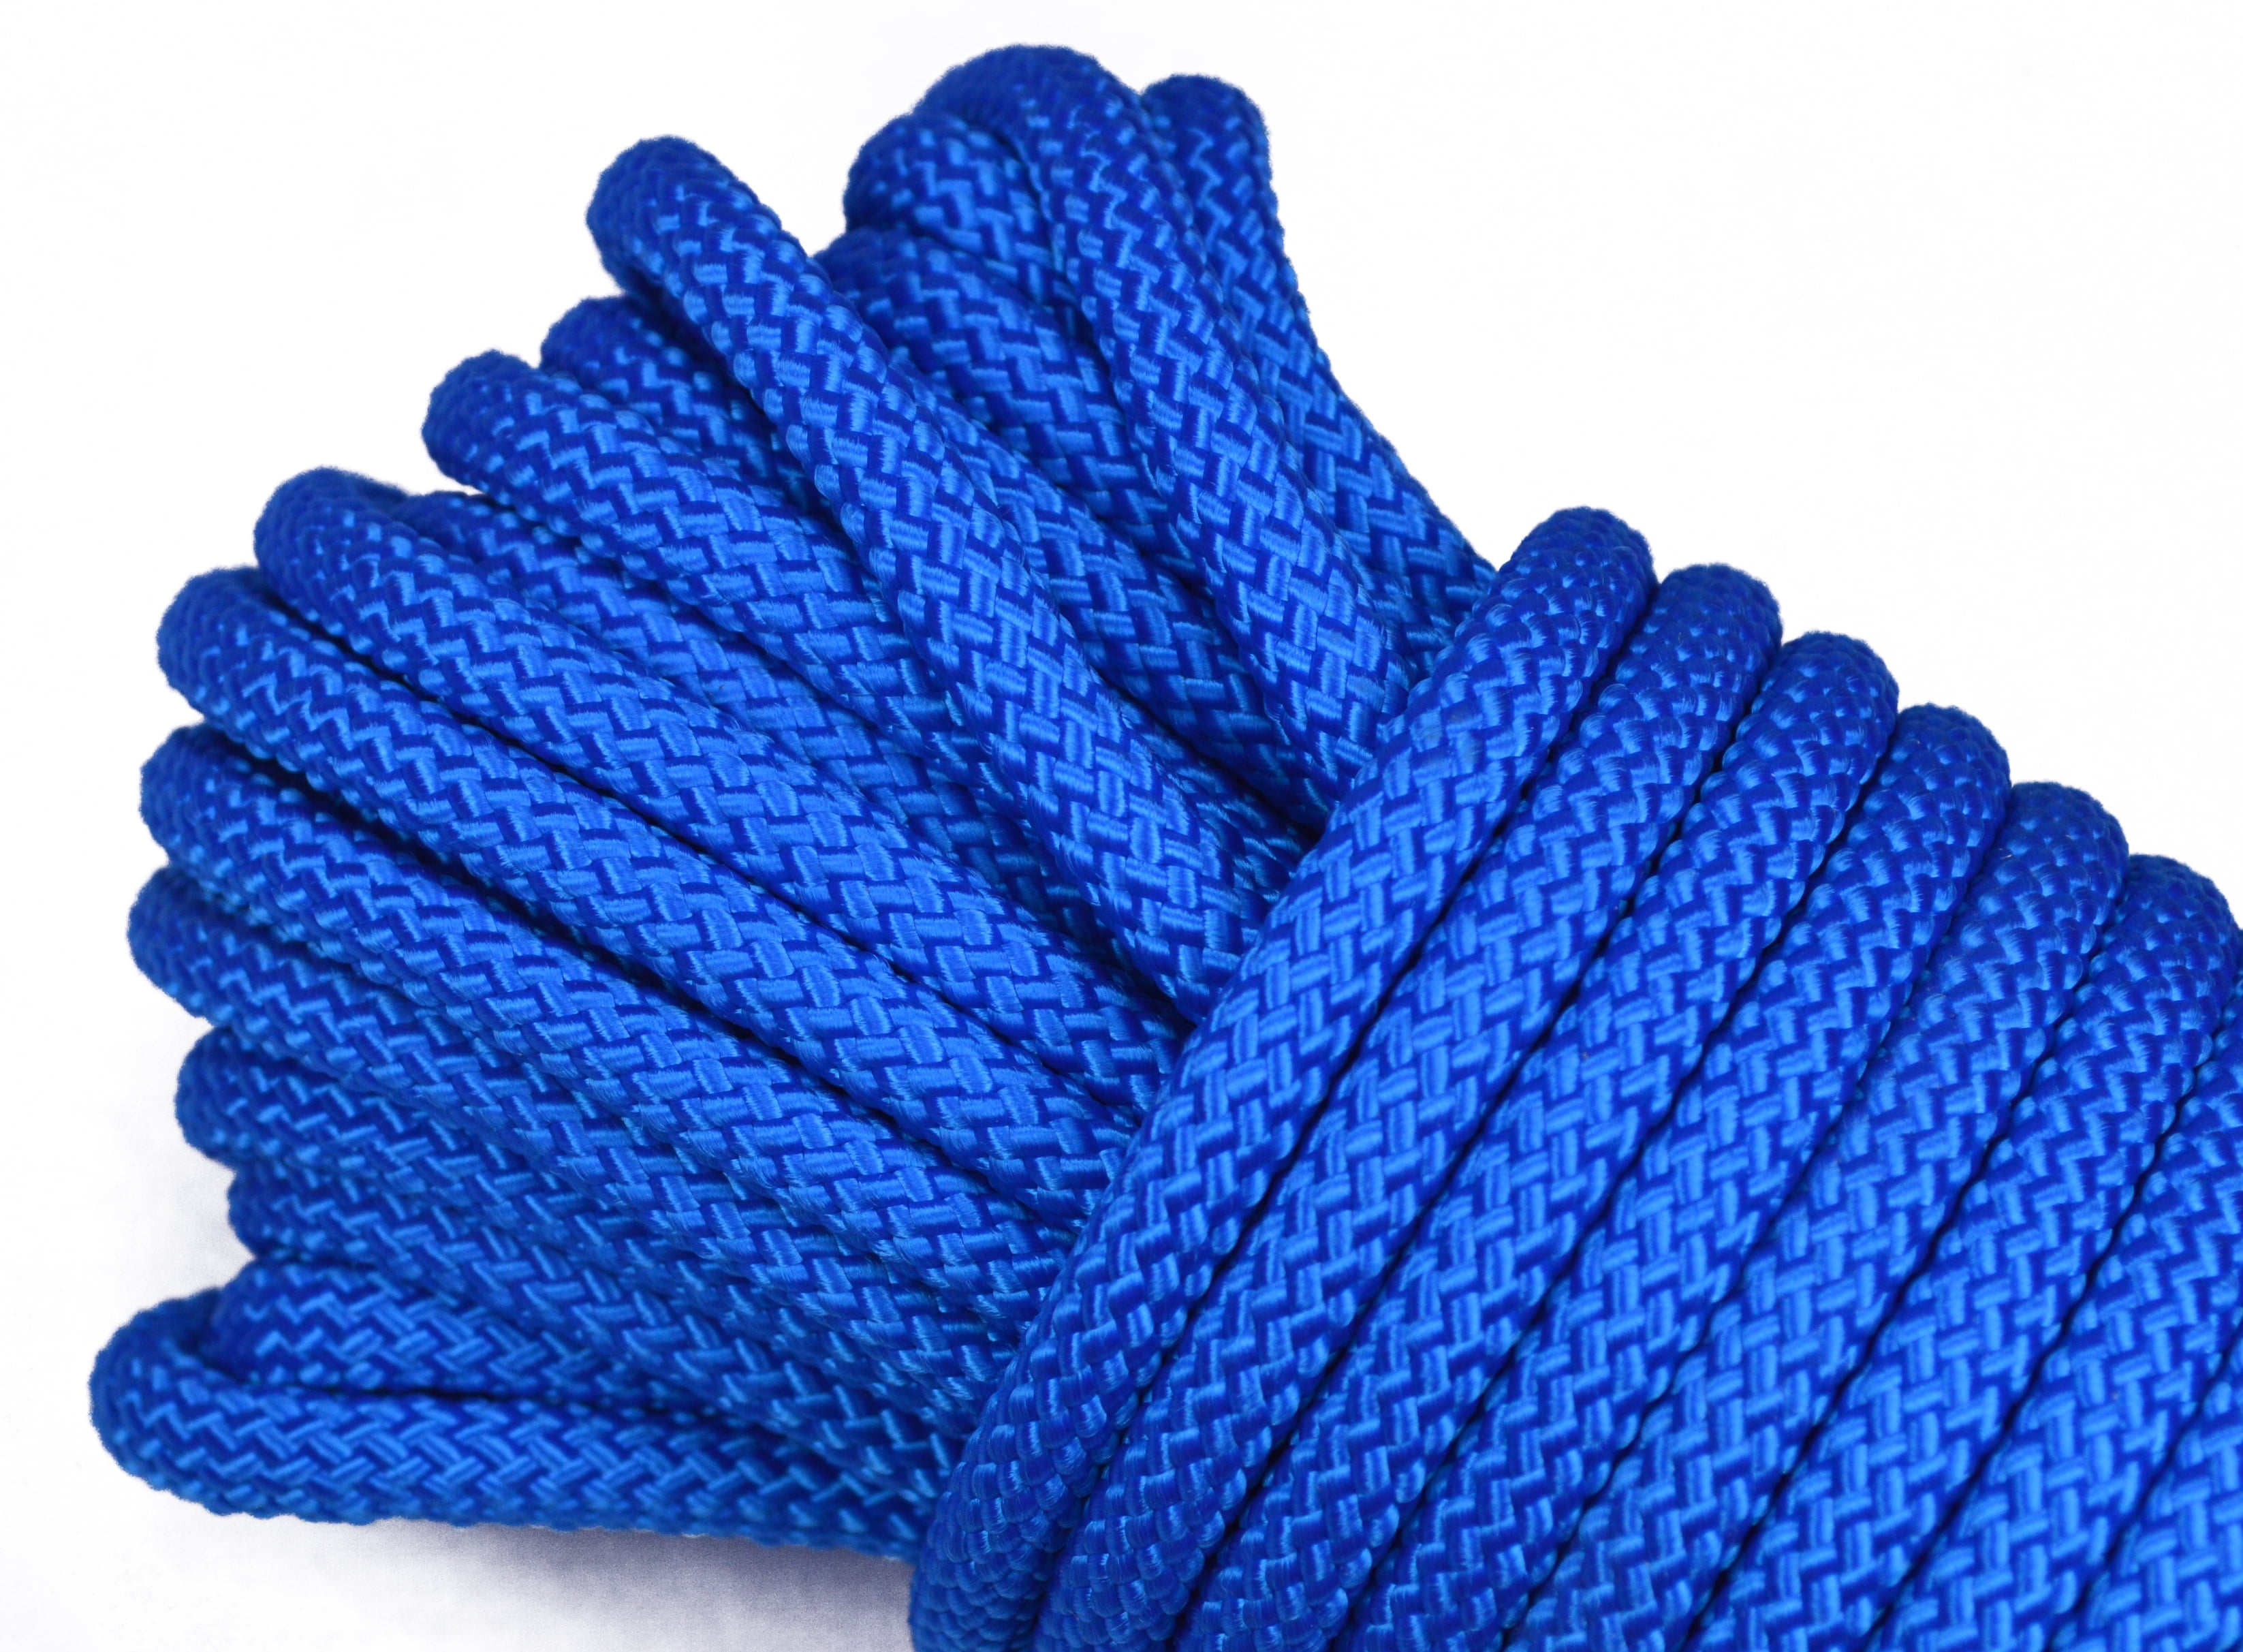 Details about   4mm Double Braid on Braid Polypropylene Marine Rope Extra Strong Nylon Para Cord 